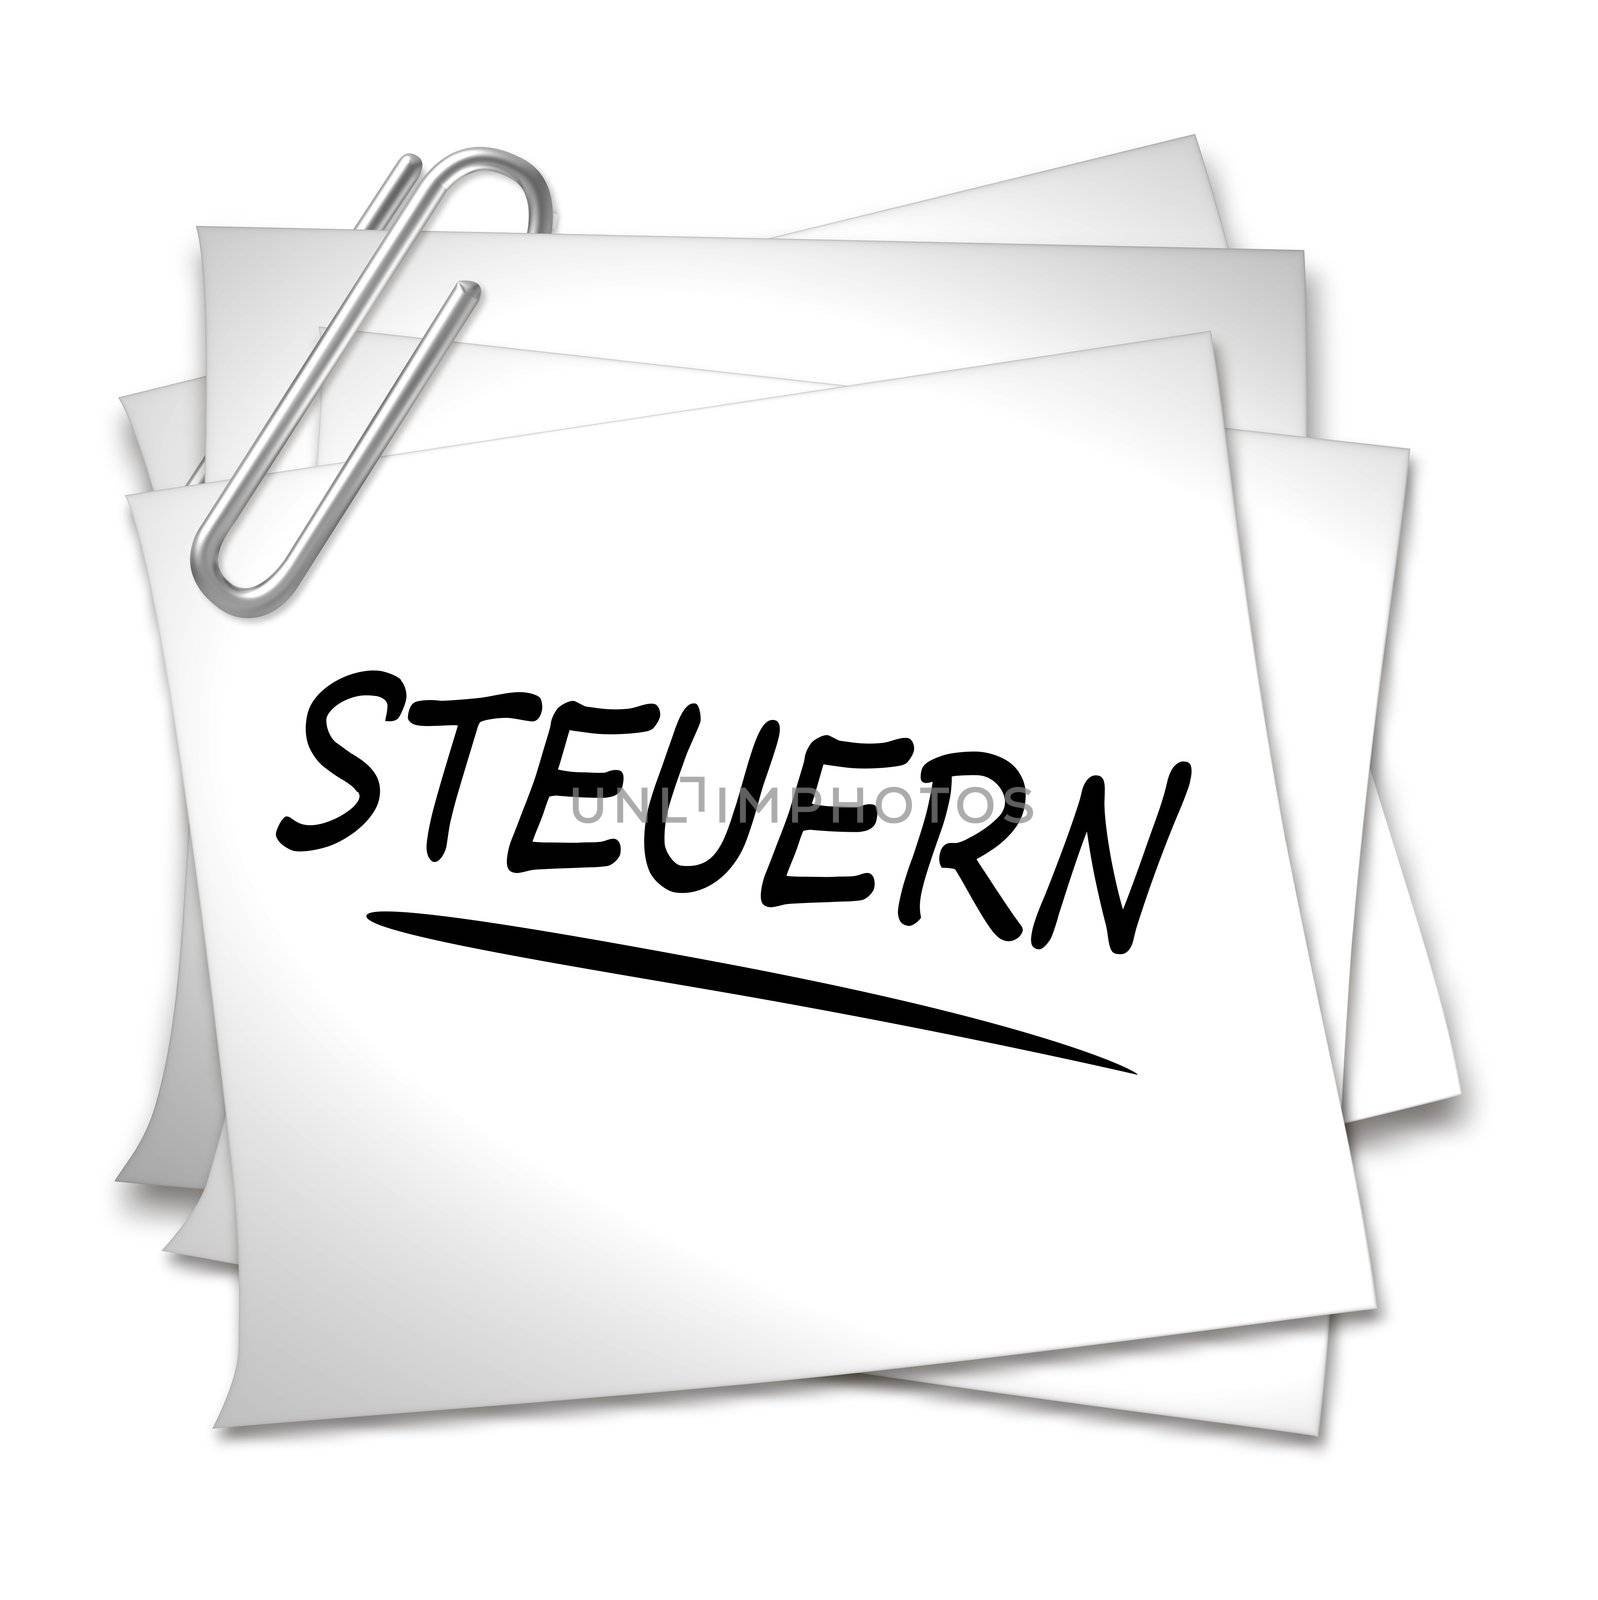 German Memo with Paper Clip - Steuern by peromarketing